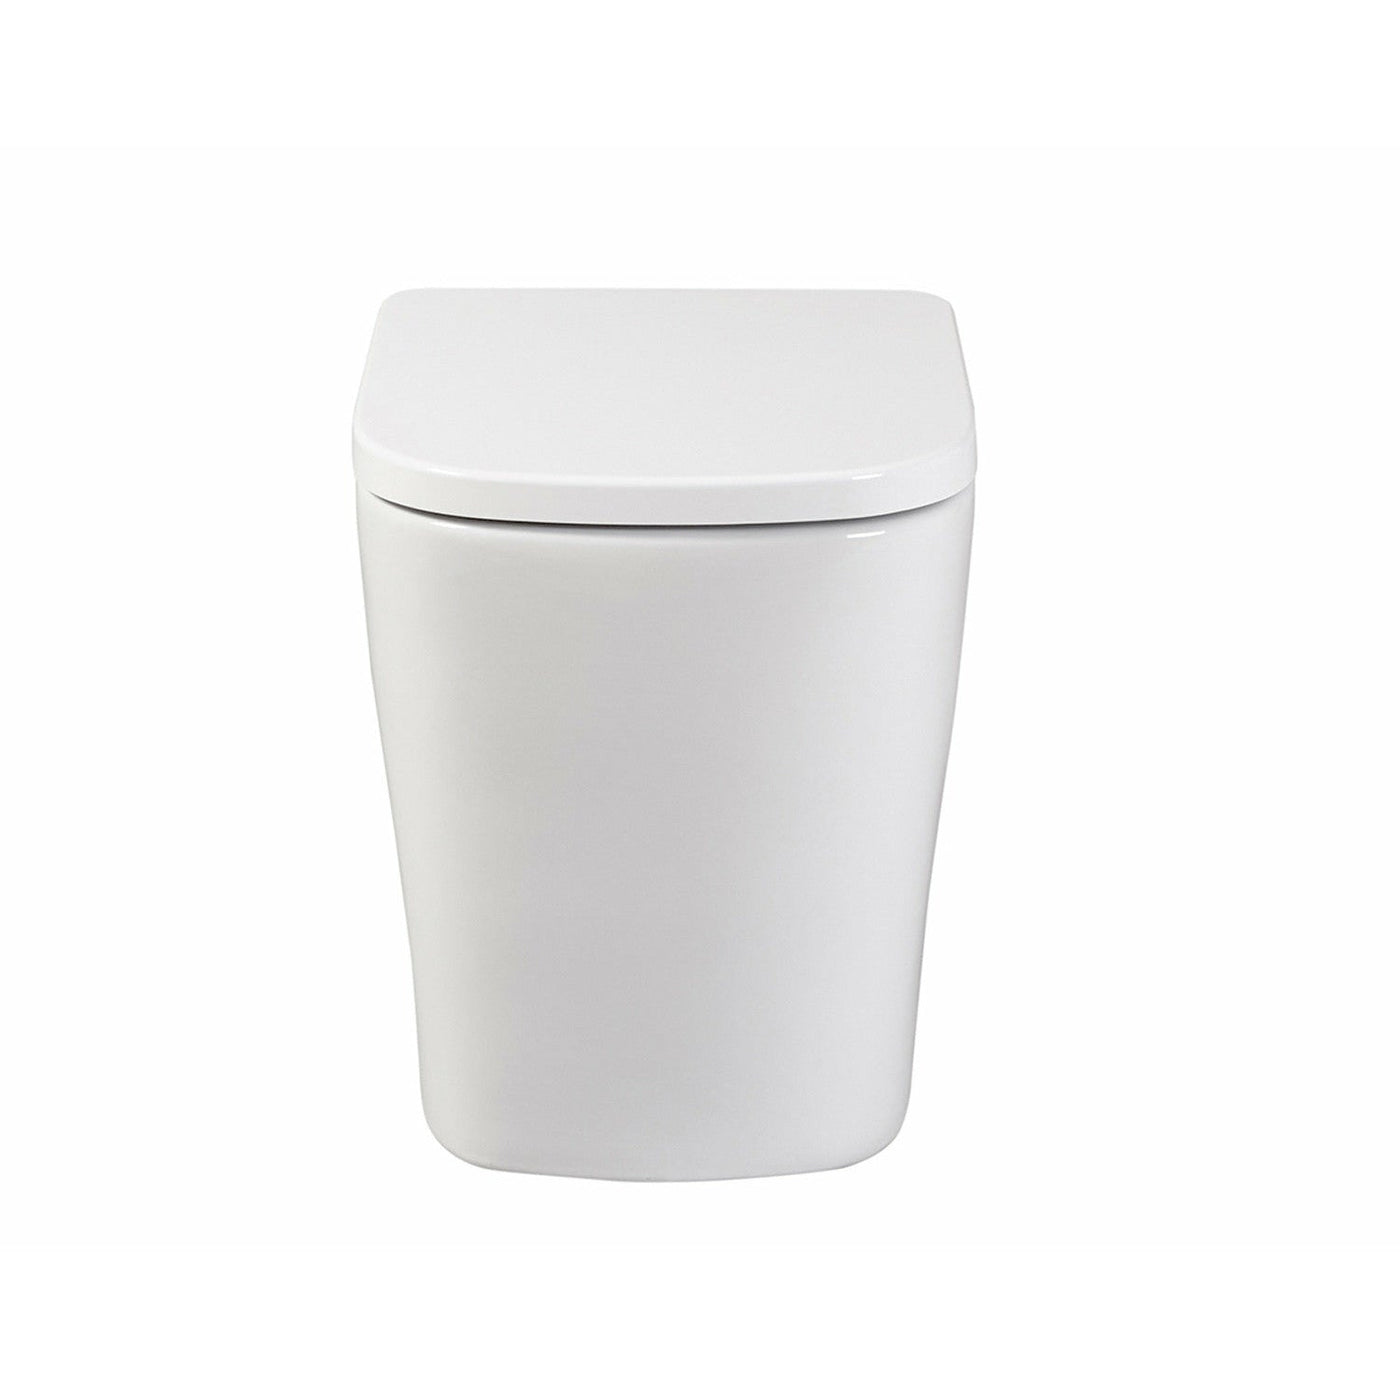 Frontline Modo Back-to-Wall Toilet with Soft-Close Seat - Letta London - 